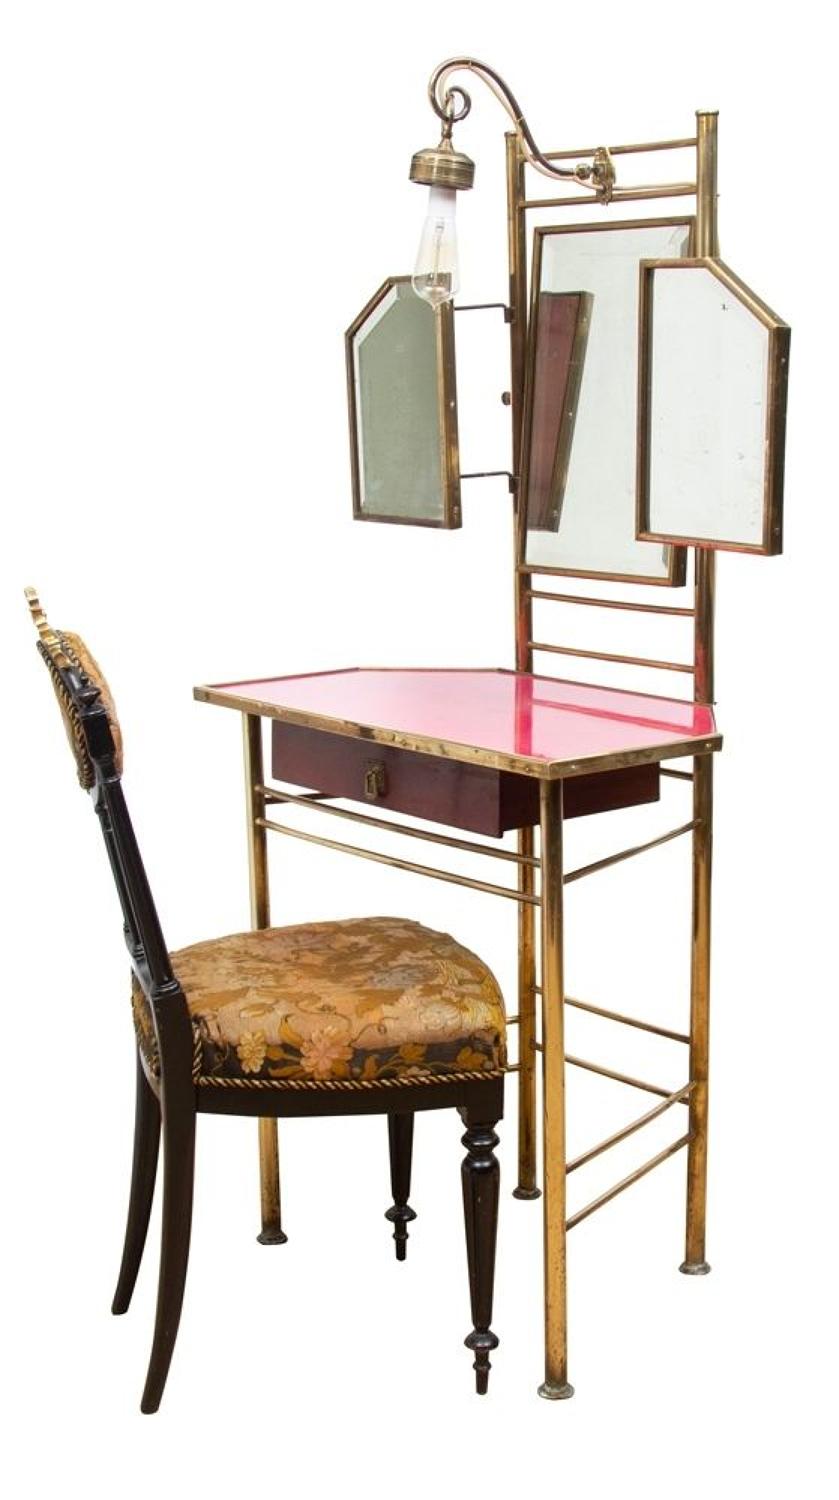 Vintage French Dressing Table and Chair c.1920